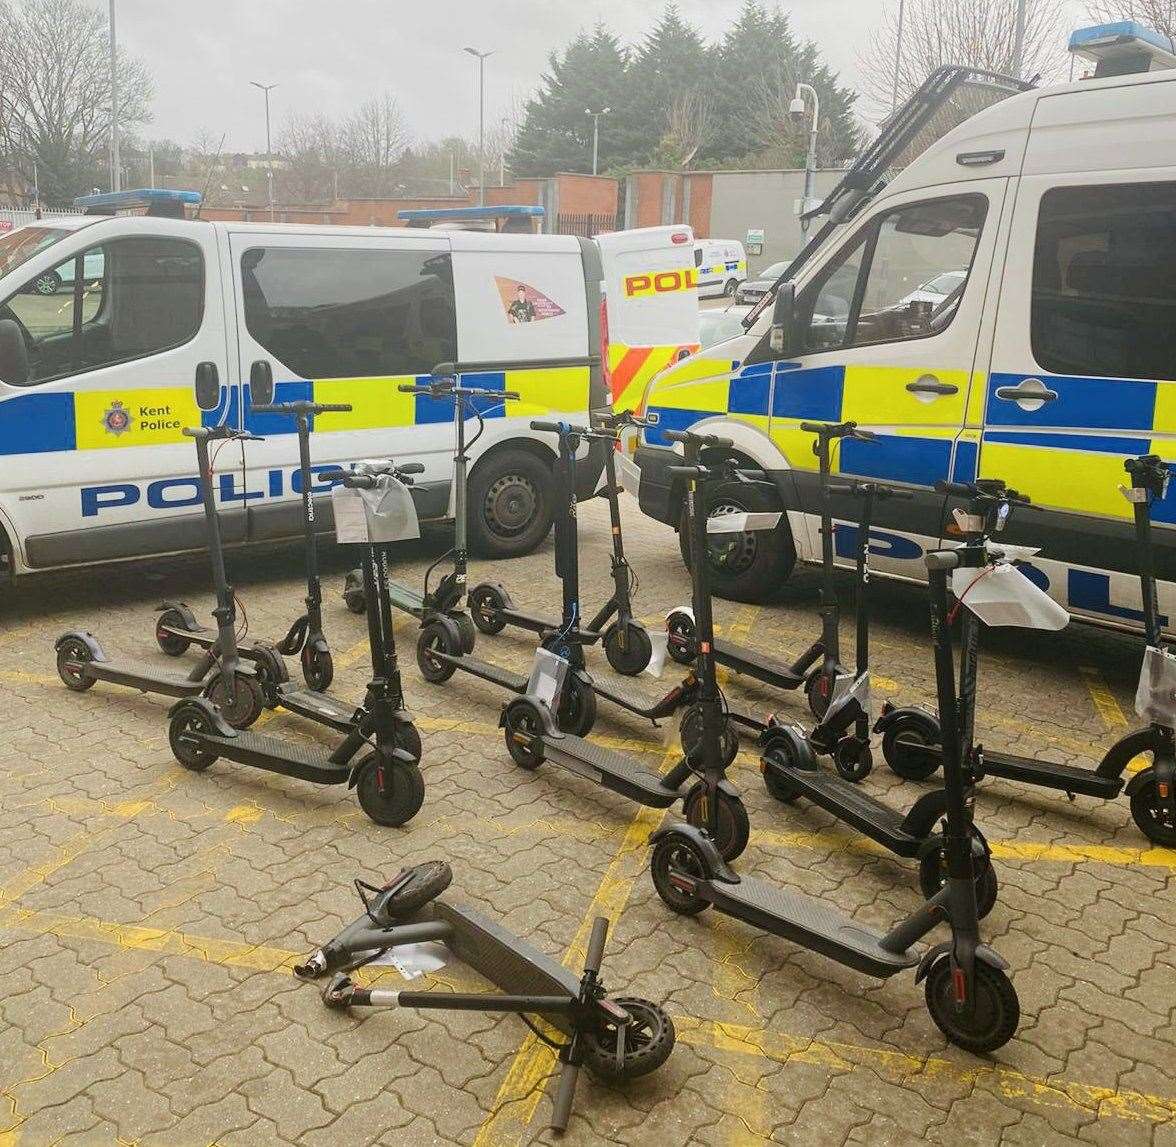 Mr Scott says Kent Police are being proactive and seizing illegally driven e-scooters